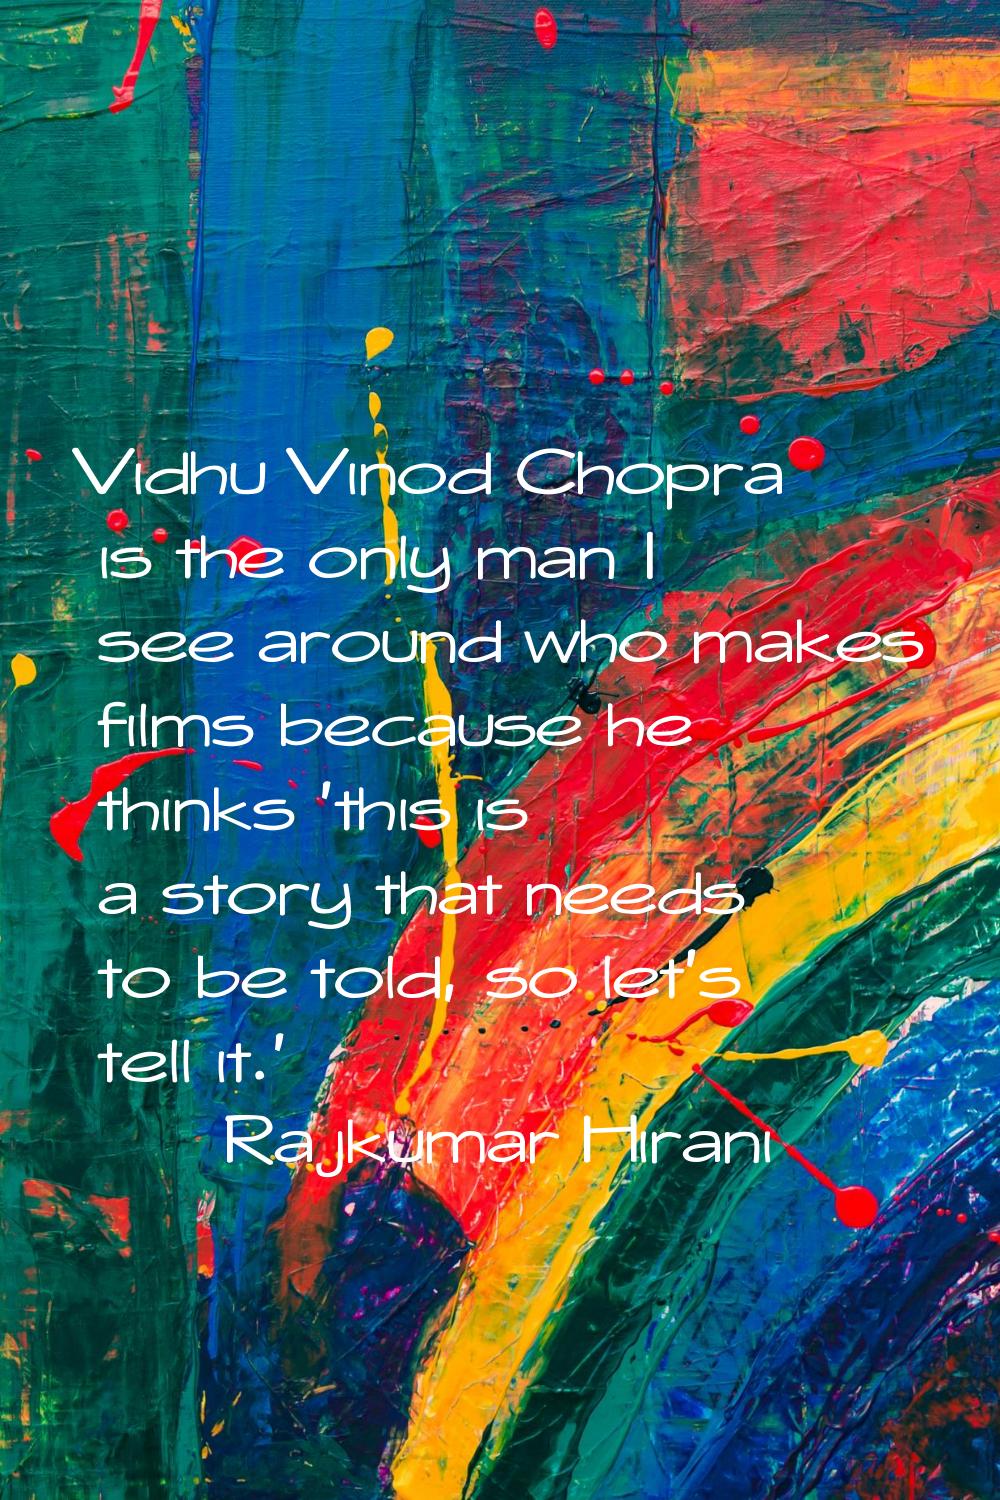 Vidhu Vinod Chopra is the only man I see around who makes films because he thinks 'this is a story 